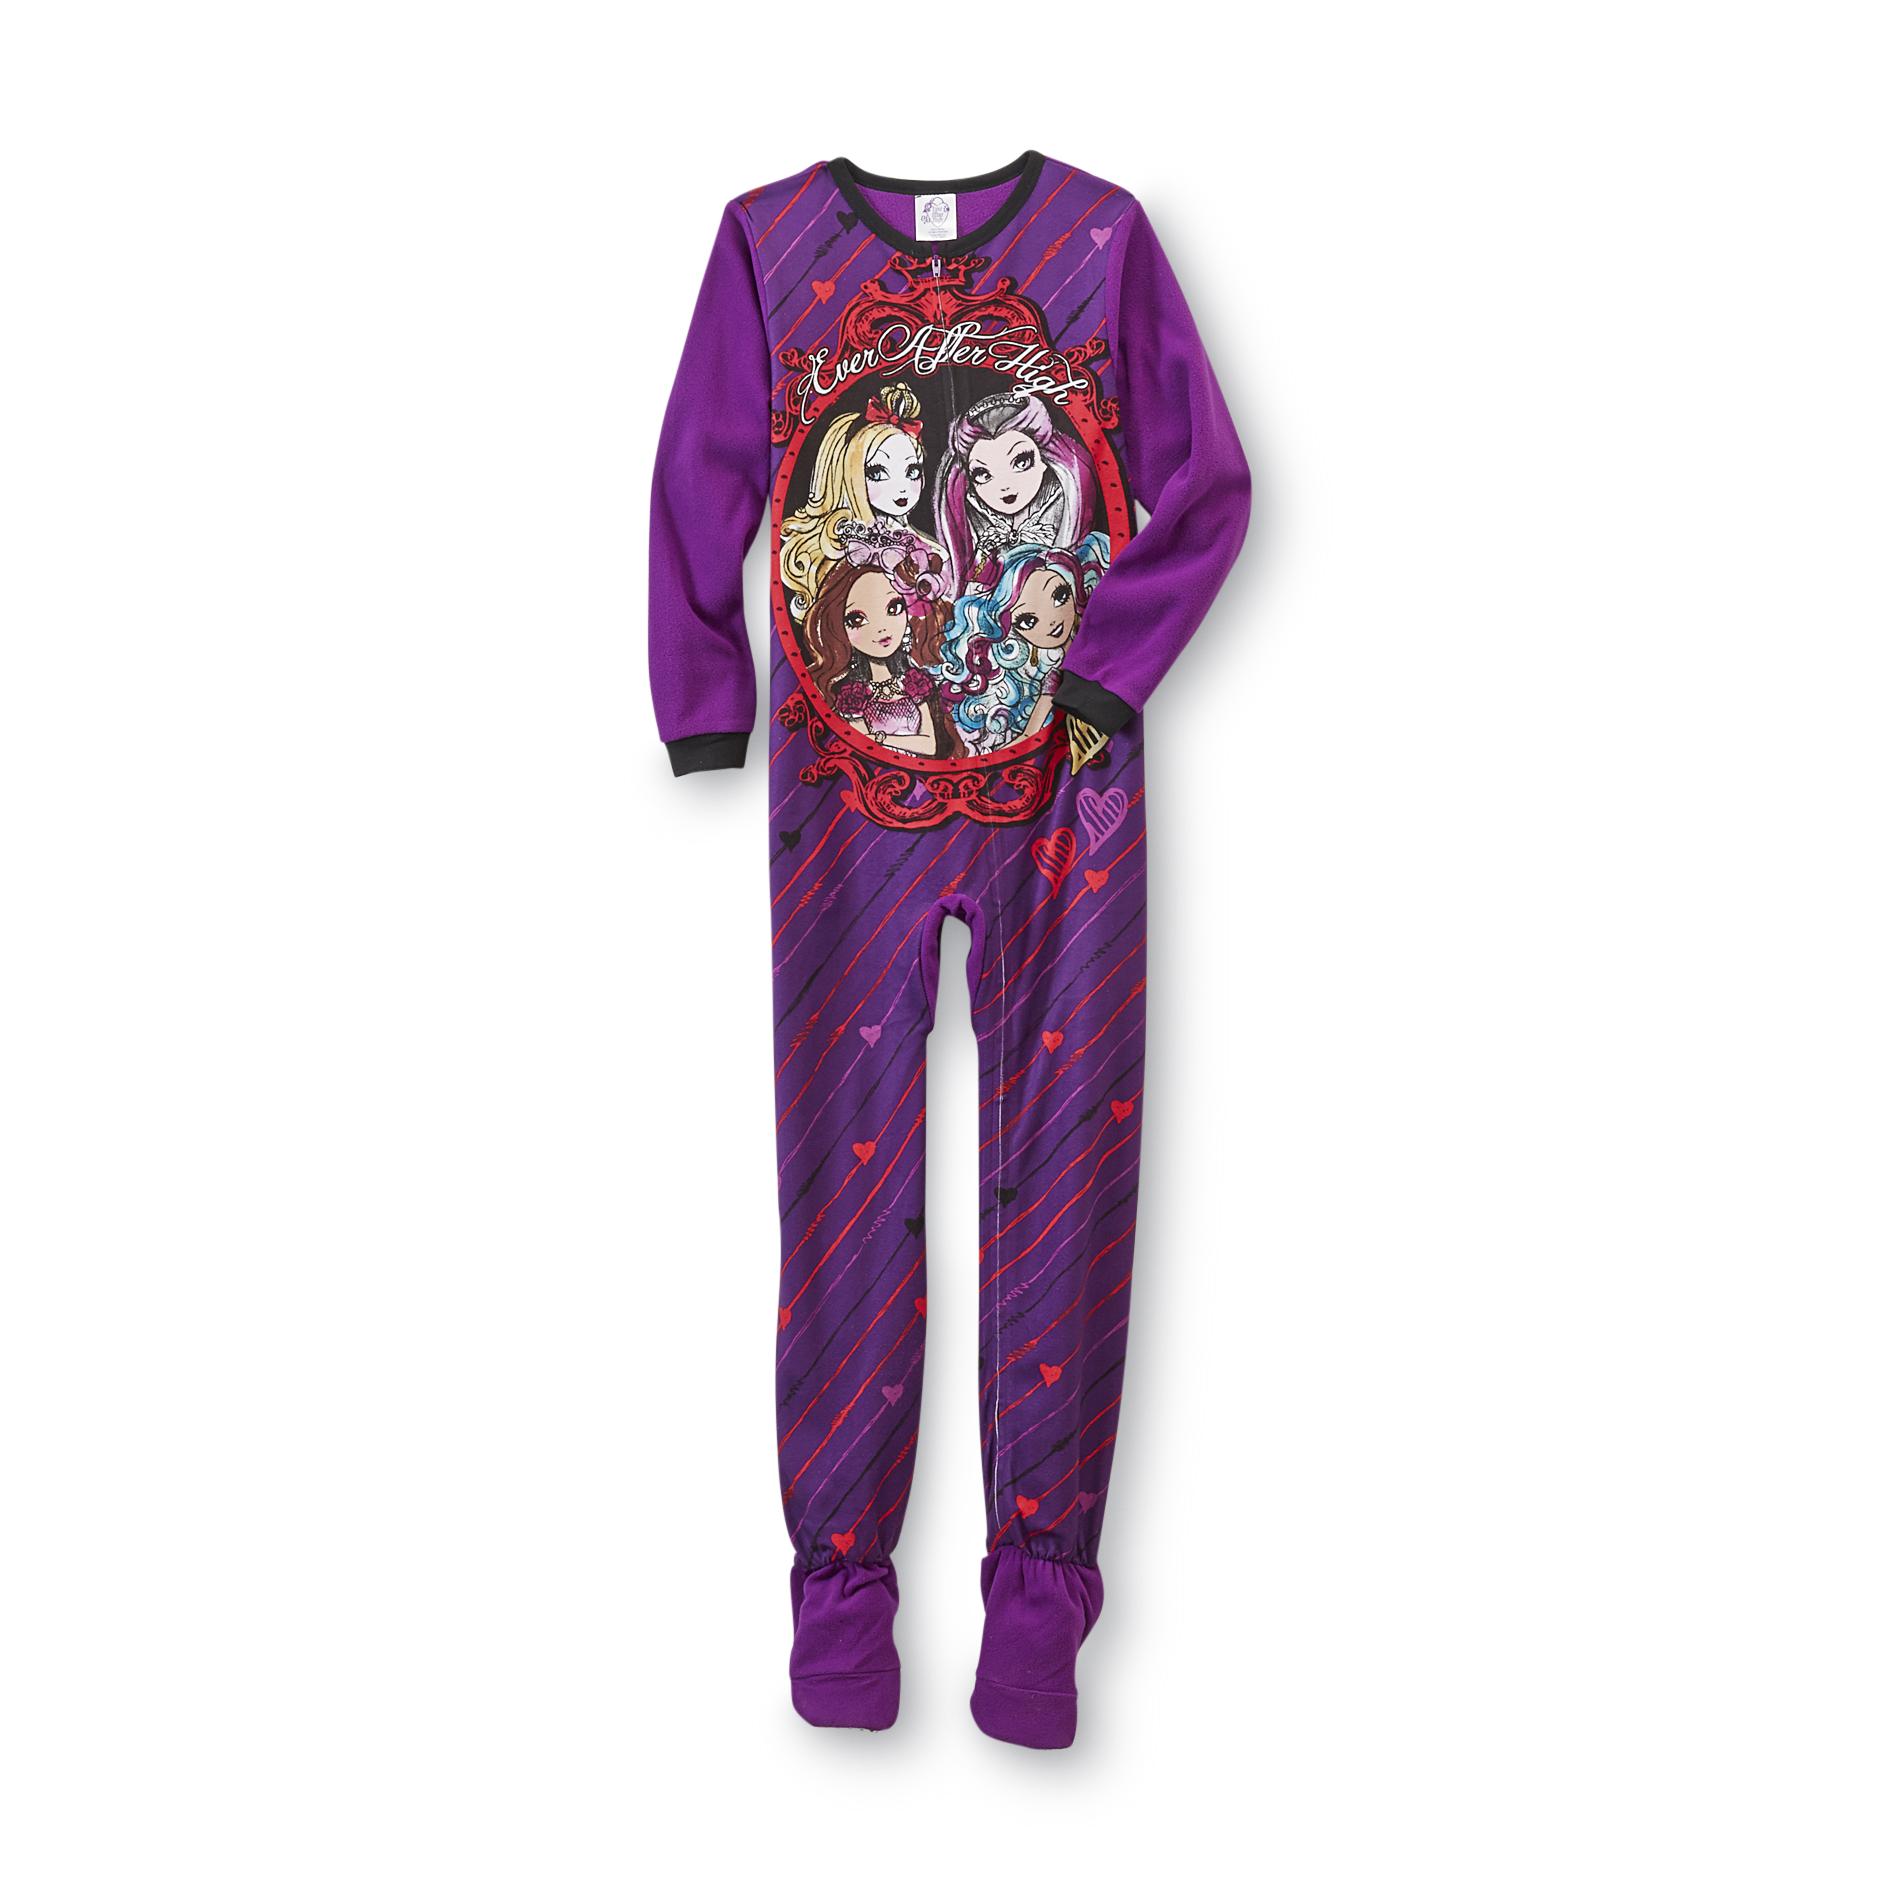 Ever After High Girl's Footed Pajamas